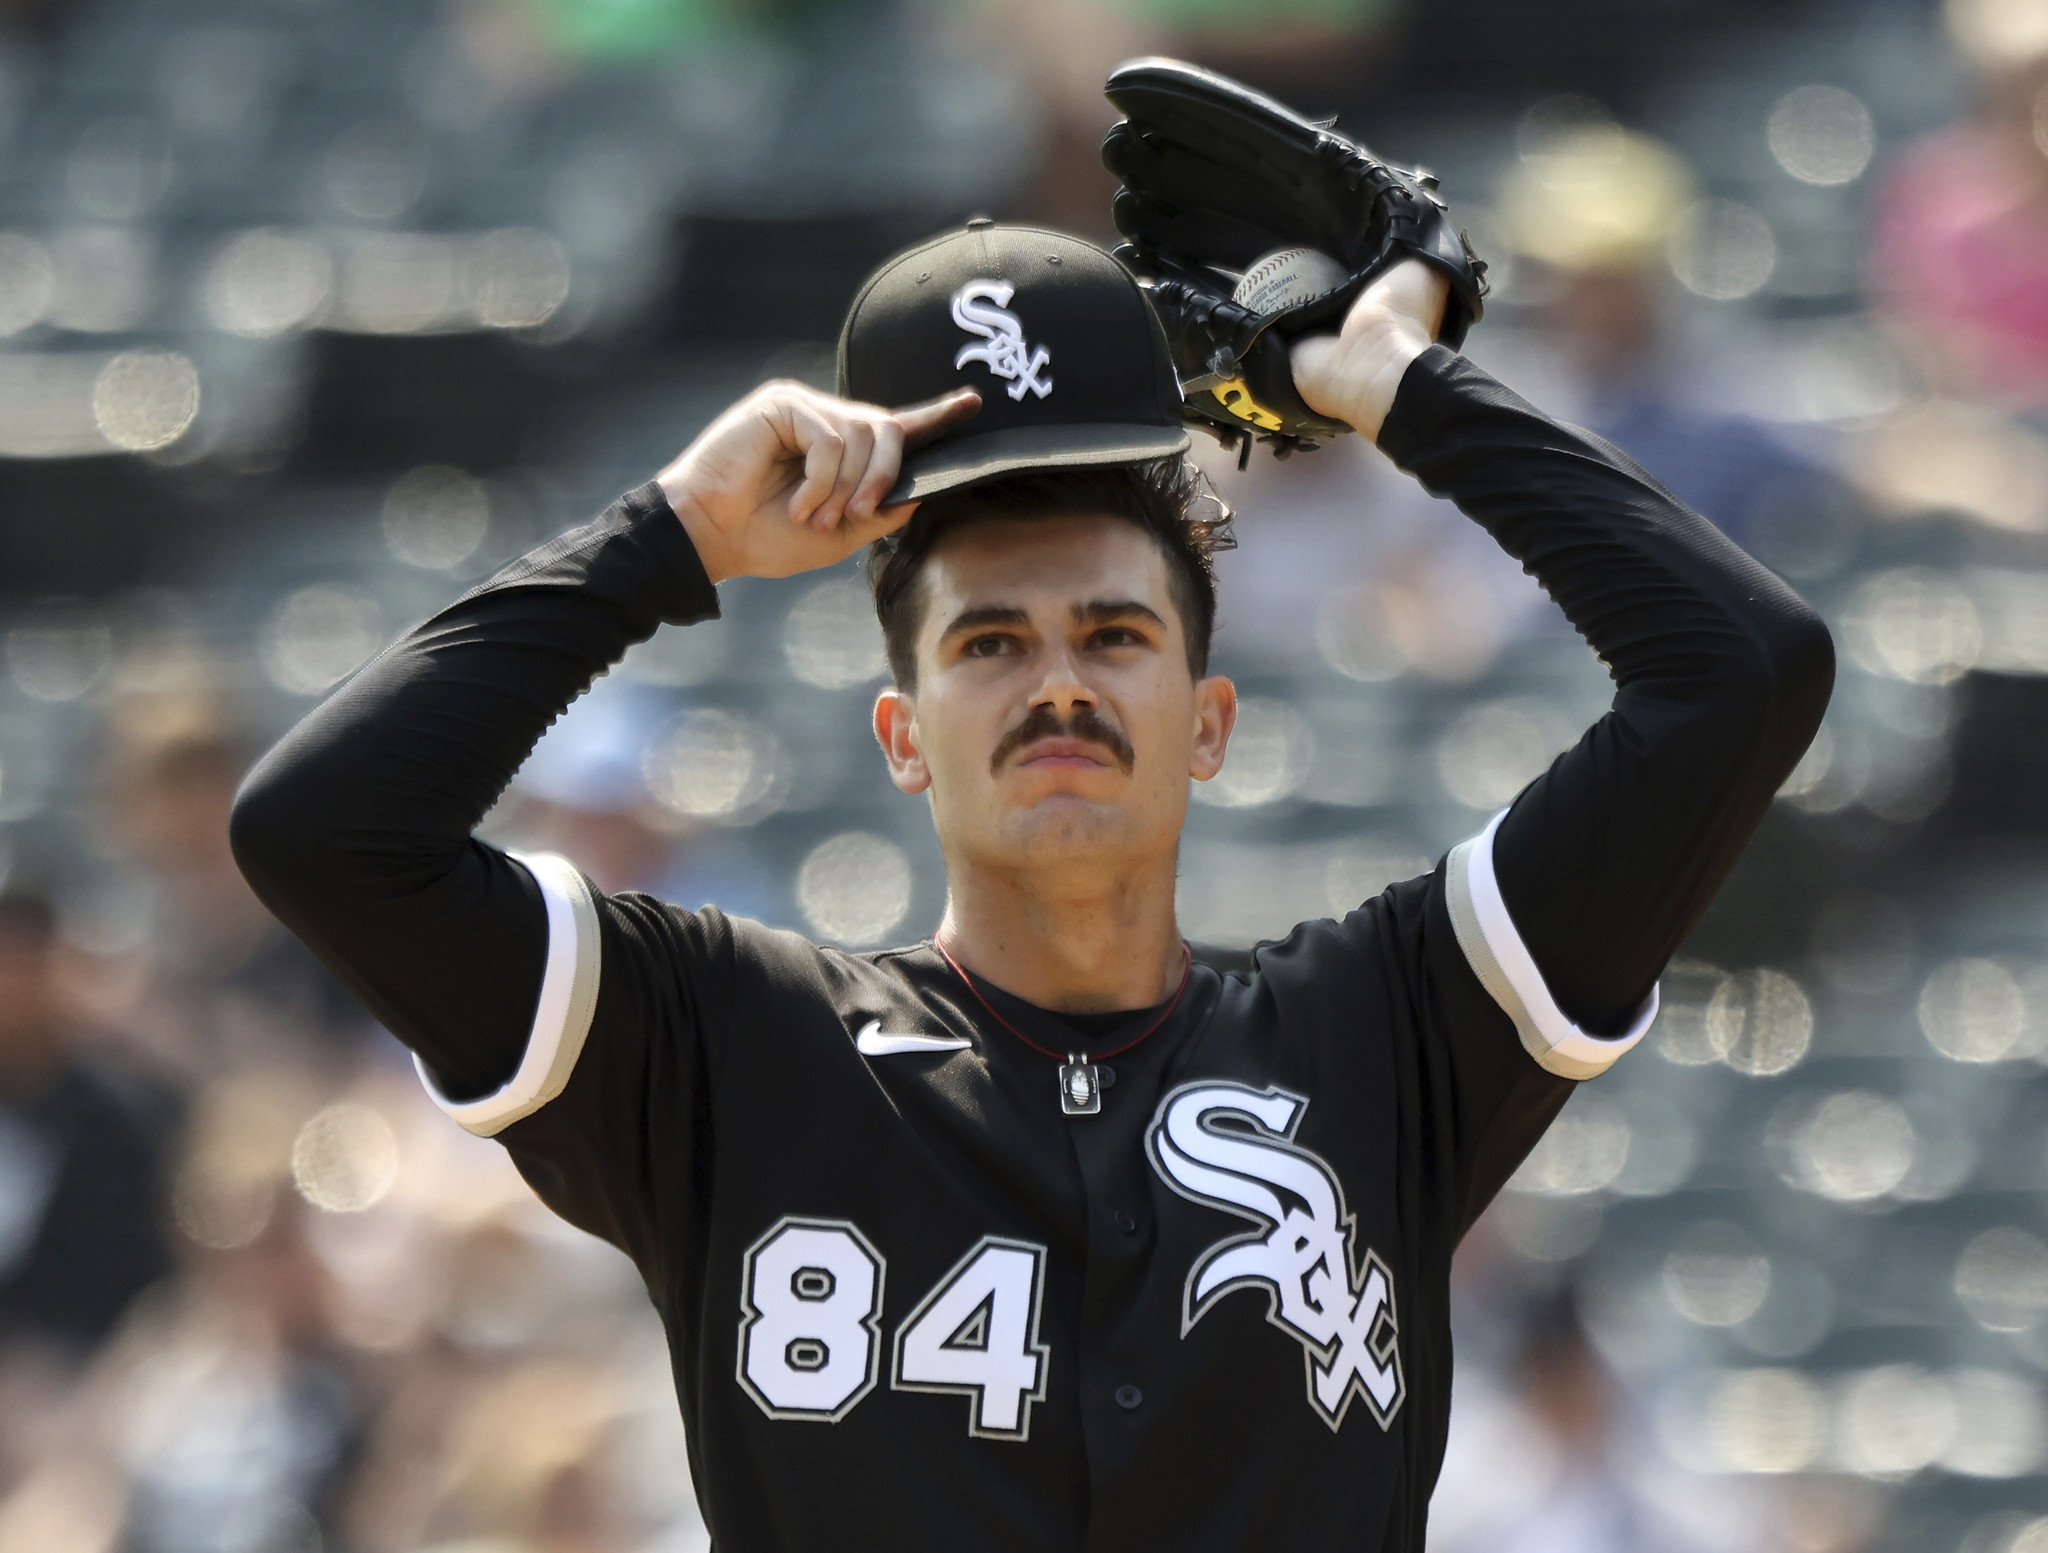 White Sox' Dylan Cease ends season on strong note - Chicago Sun-Times